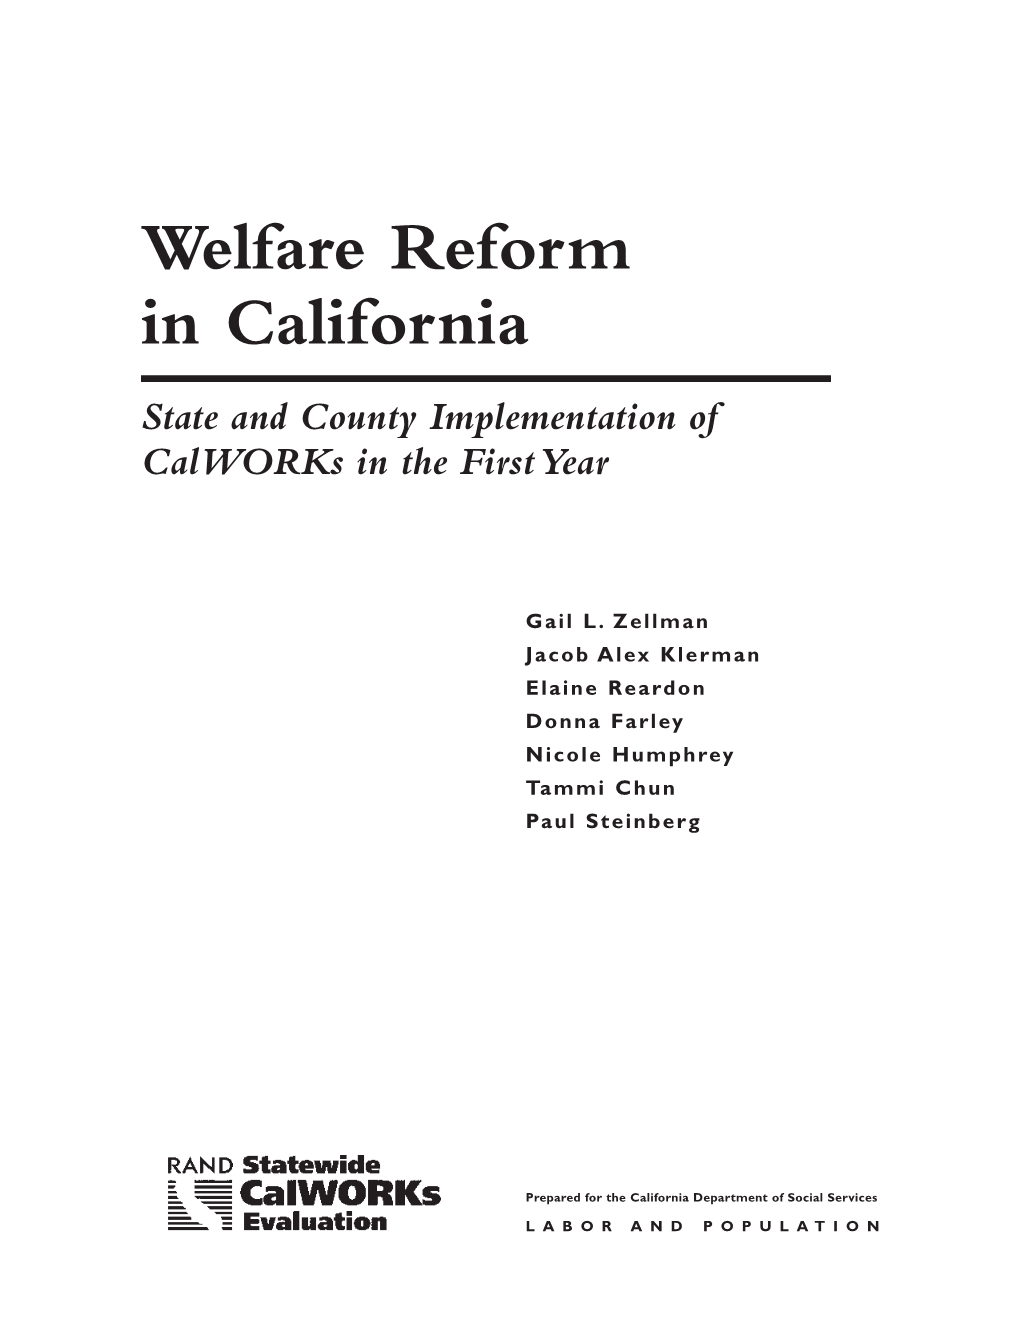 Welfare Reform in California State and County Implementation of Calworks in the First Year